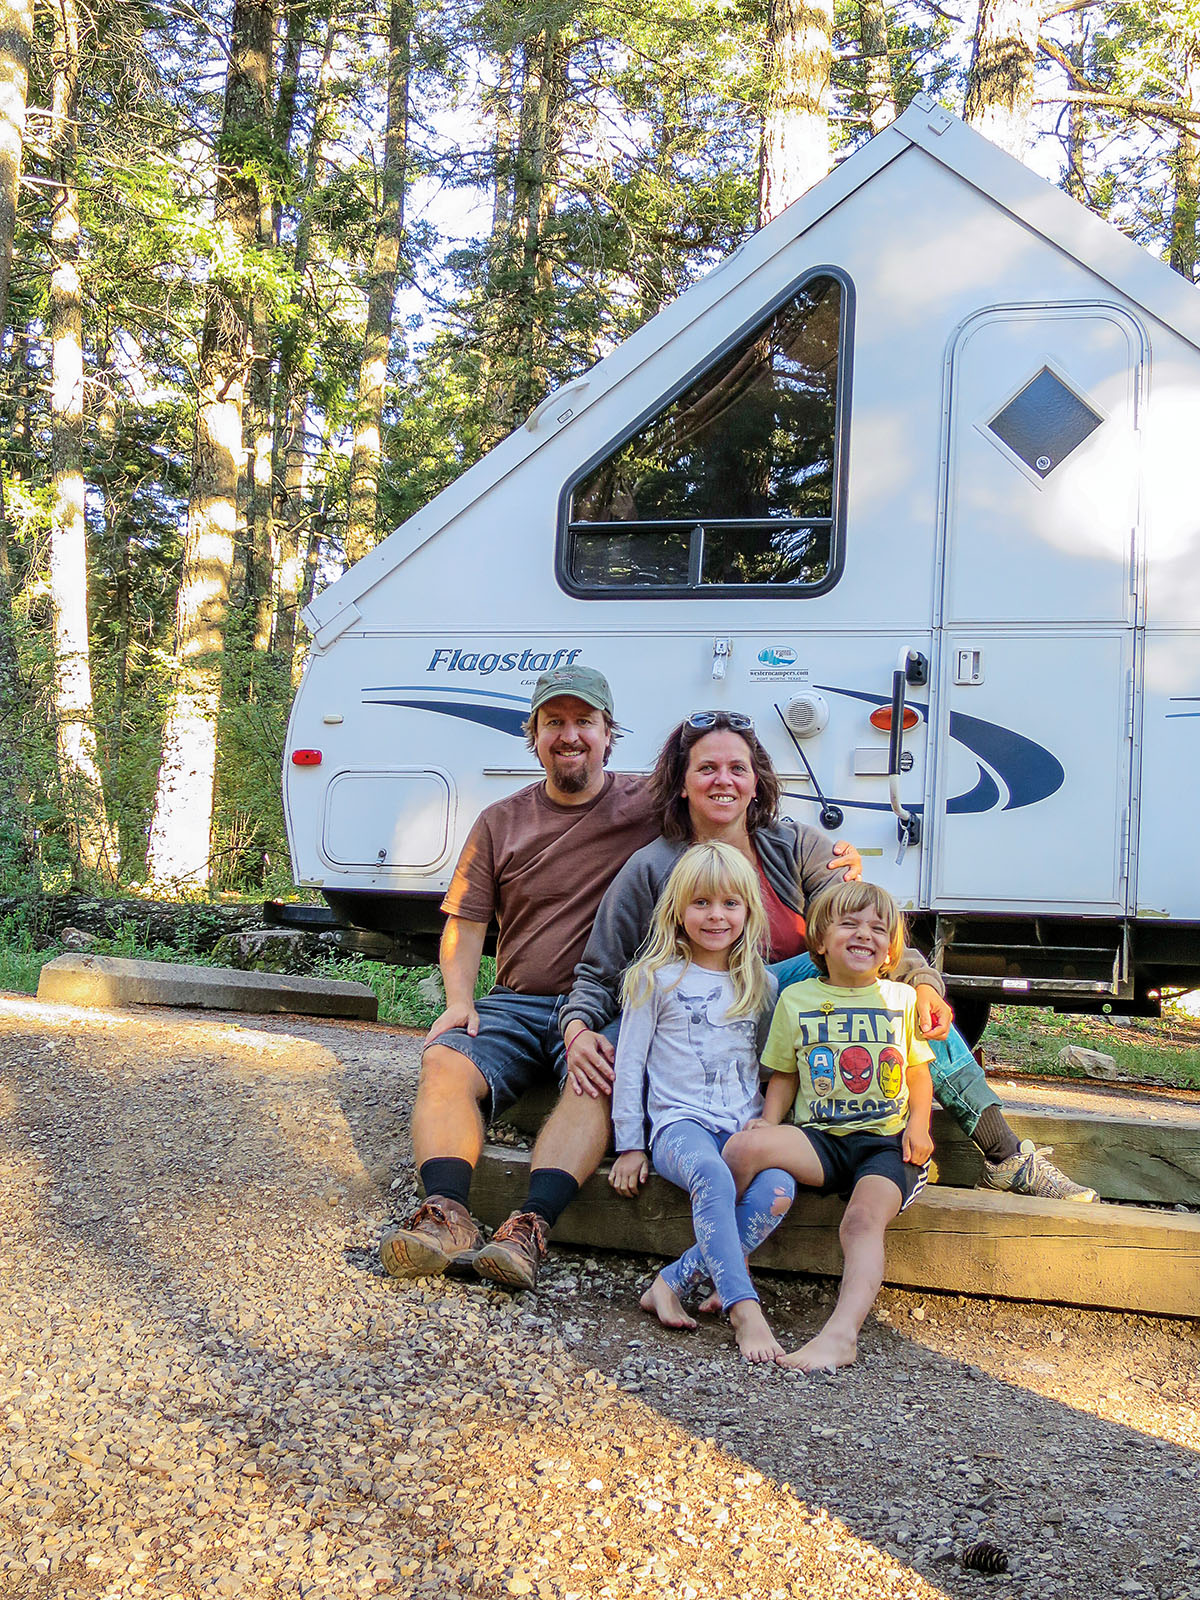 A family sits in front of a small, white, A-frame camper in a forest with tall trees